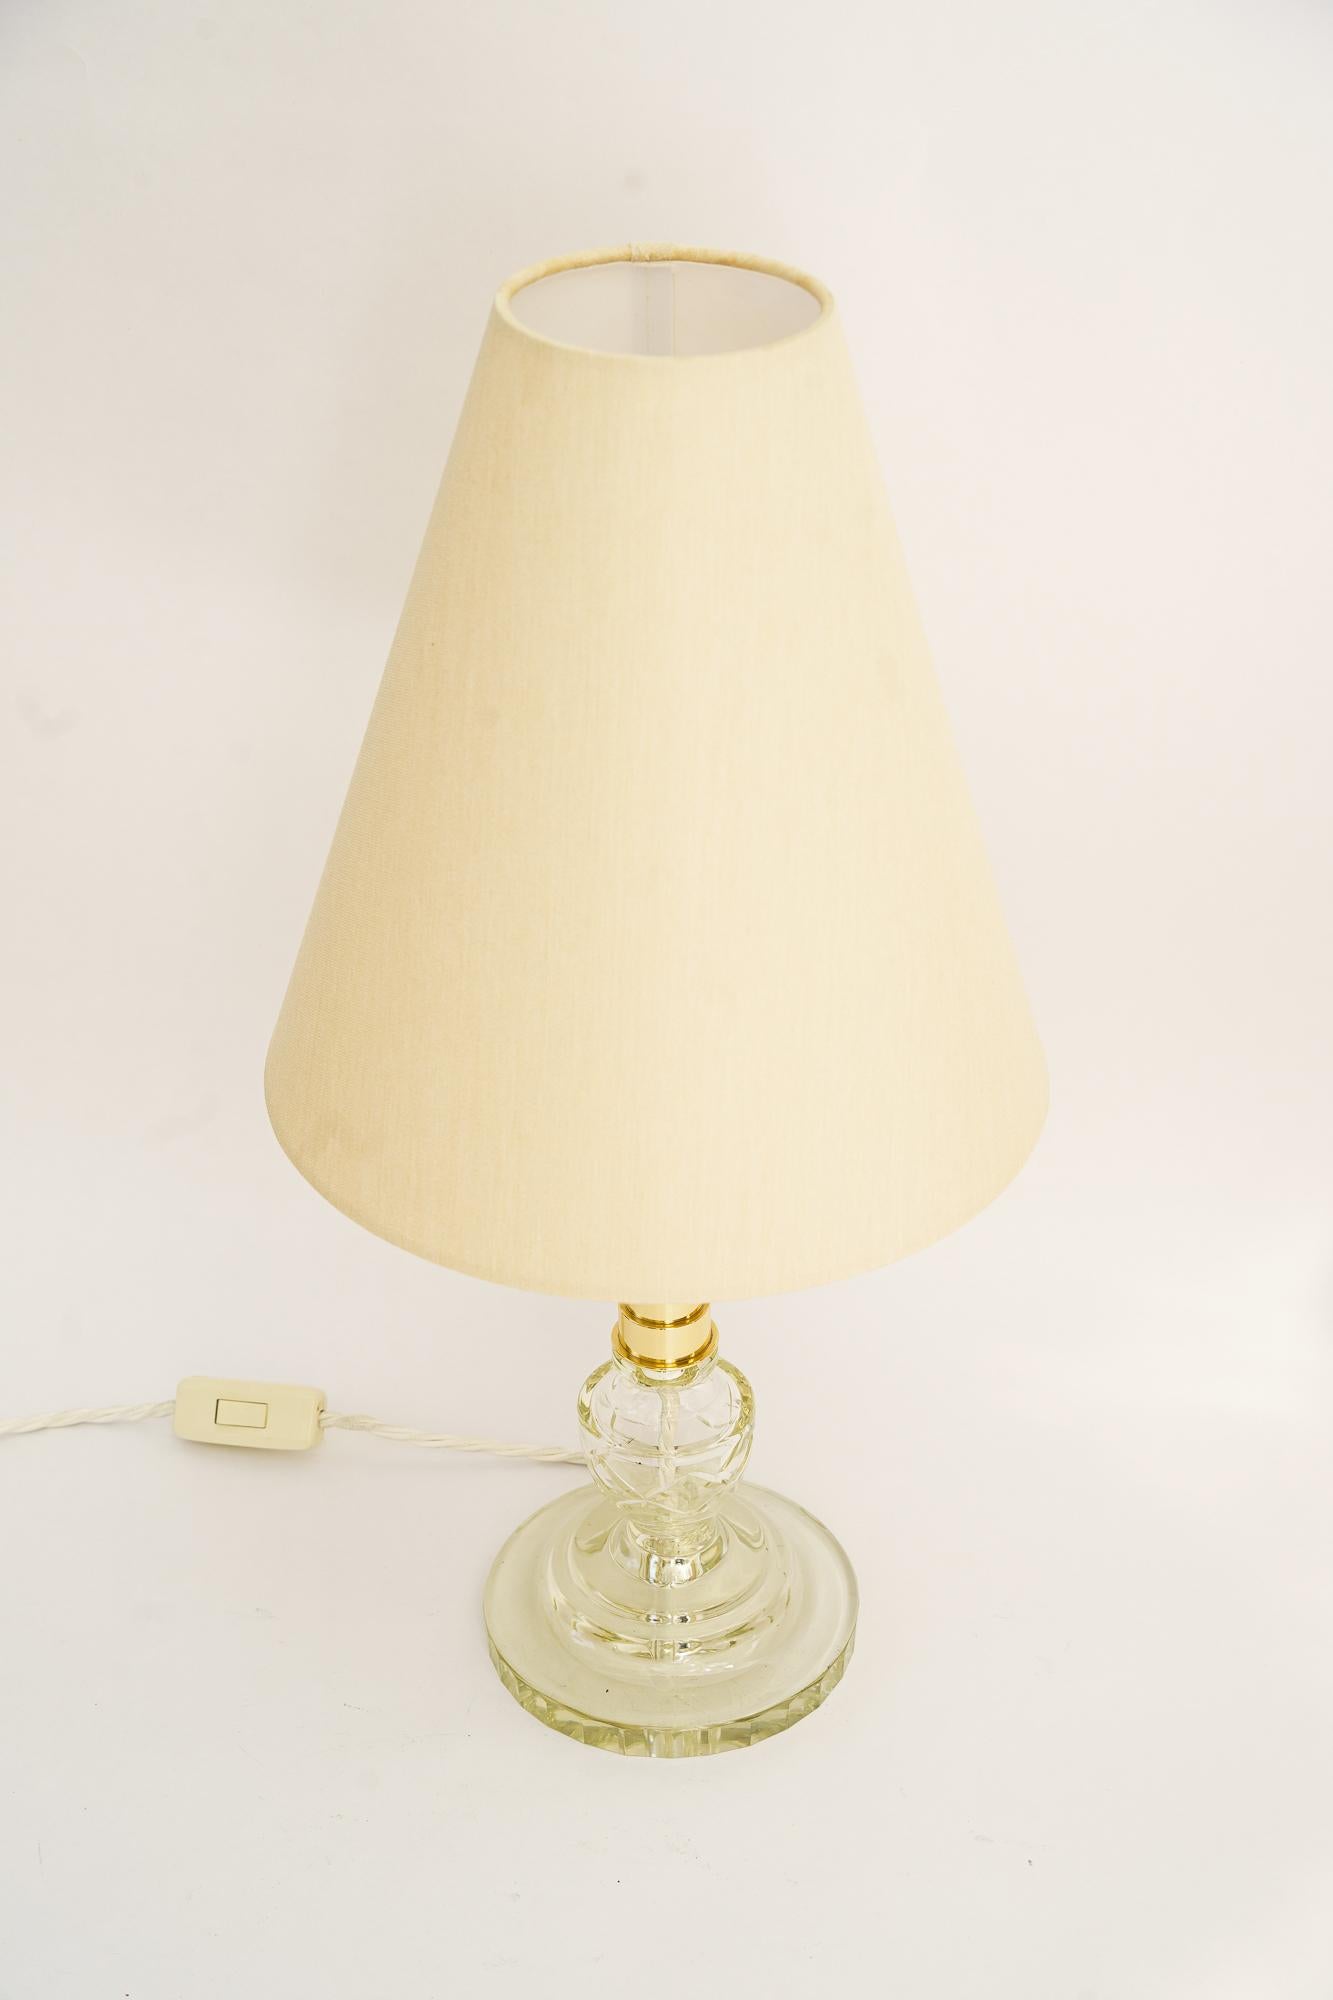 Art Deco Glass table lamp with fabric shade around 1920s 
Brass polished and stove enameled
The Fabric shade is replaced ( new )